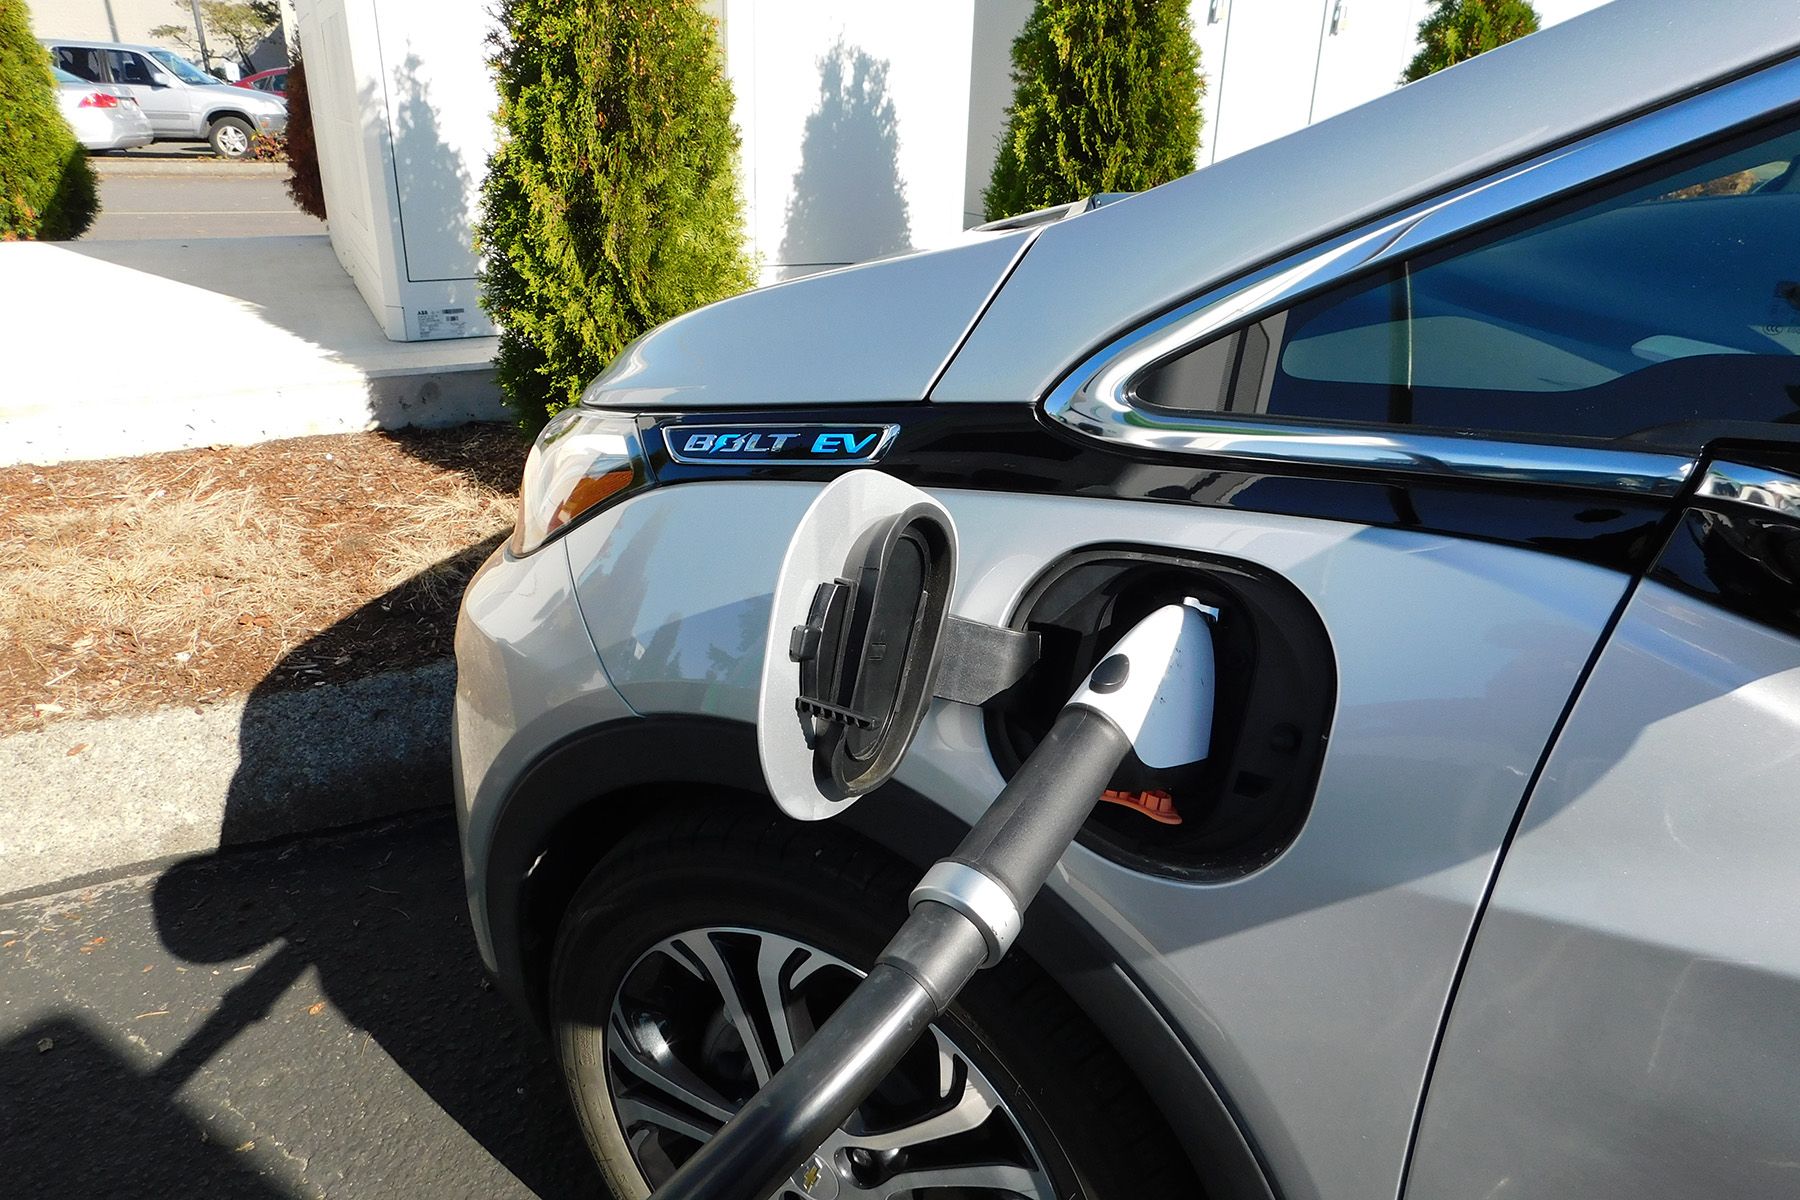 Ontario Power Generation, Hydro One create Ivy electric vehicle